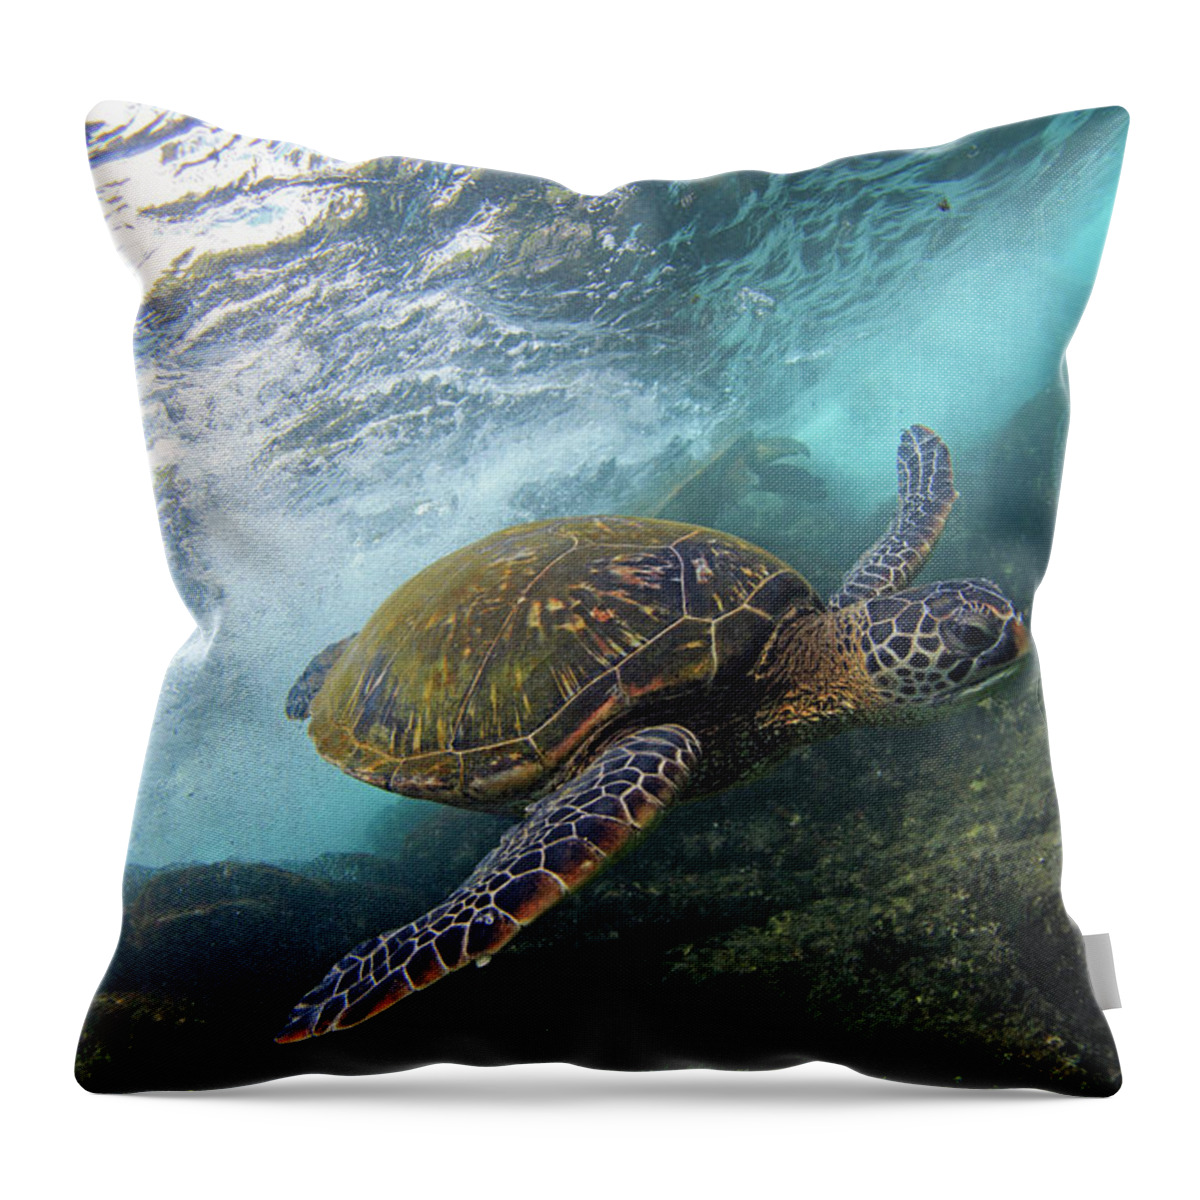 Maui Green Sea Turtle Ocean Throw Pillow featuring the photograph Flyby by James Roemmling